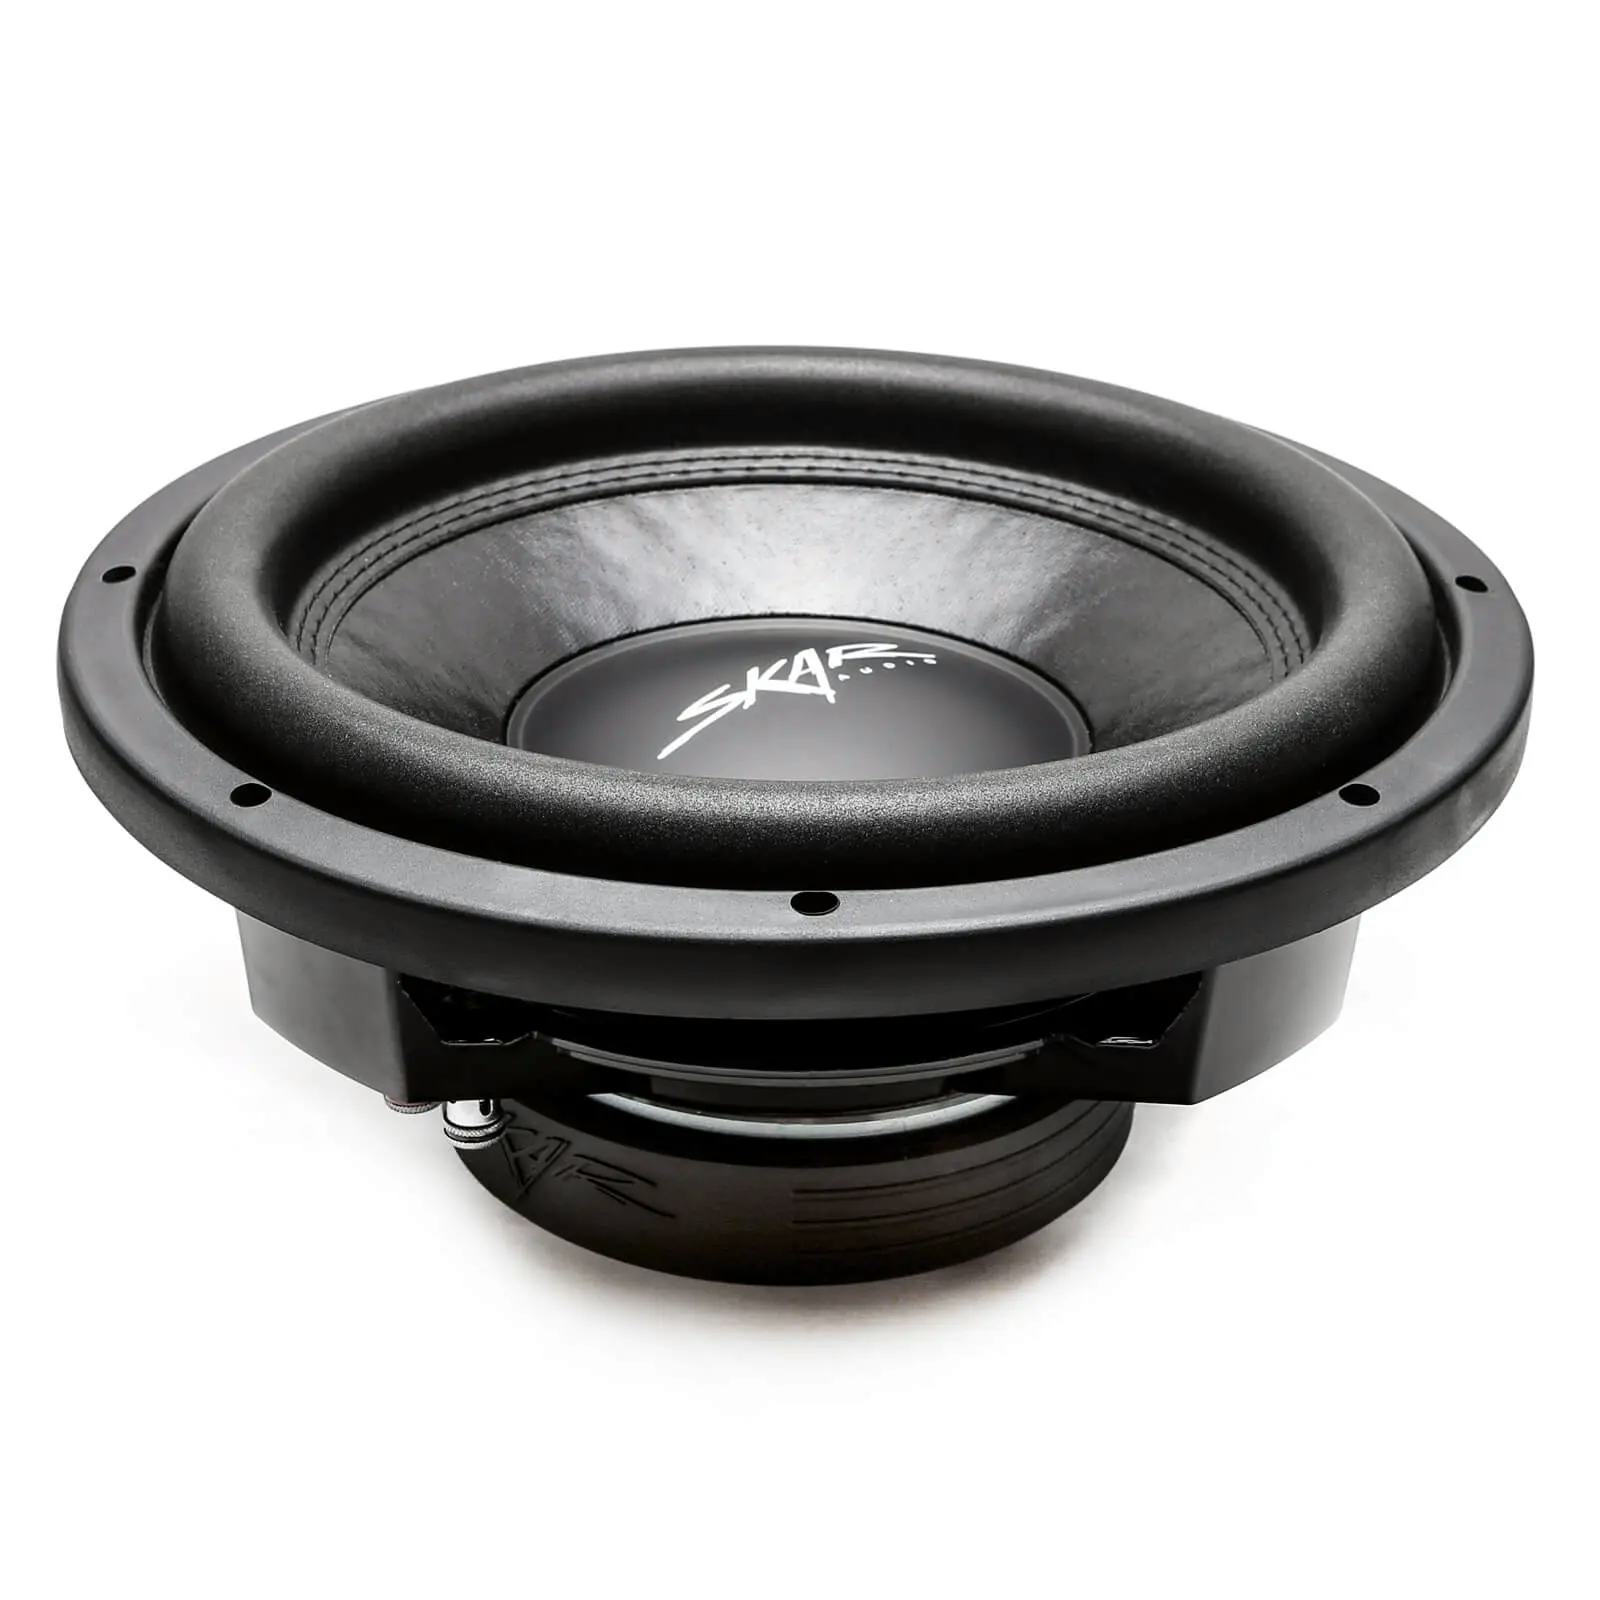 Dual 10" 1,600W Max Power Loaded Subwoofer Enclosure Compatible with 2004-2008 Ford F-150 Super Cab Trucks #8